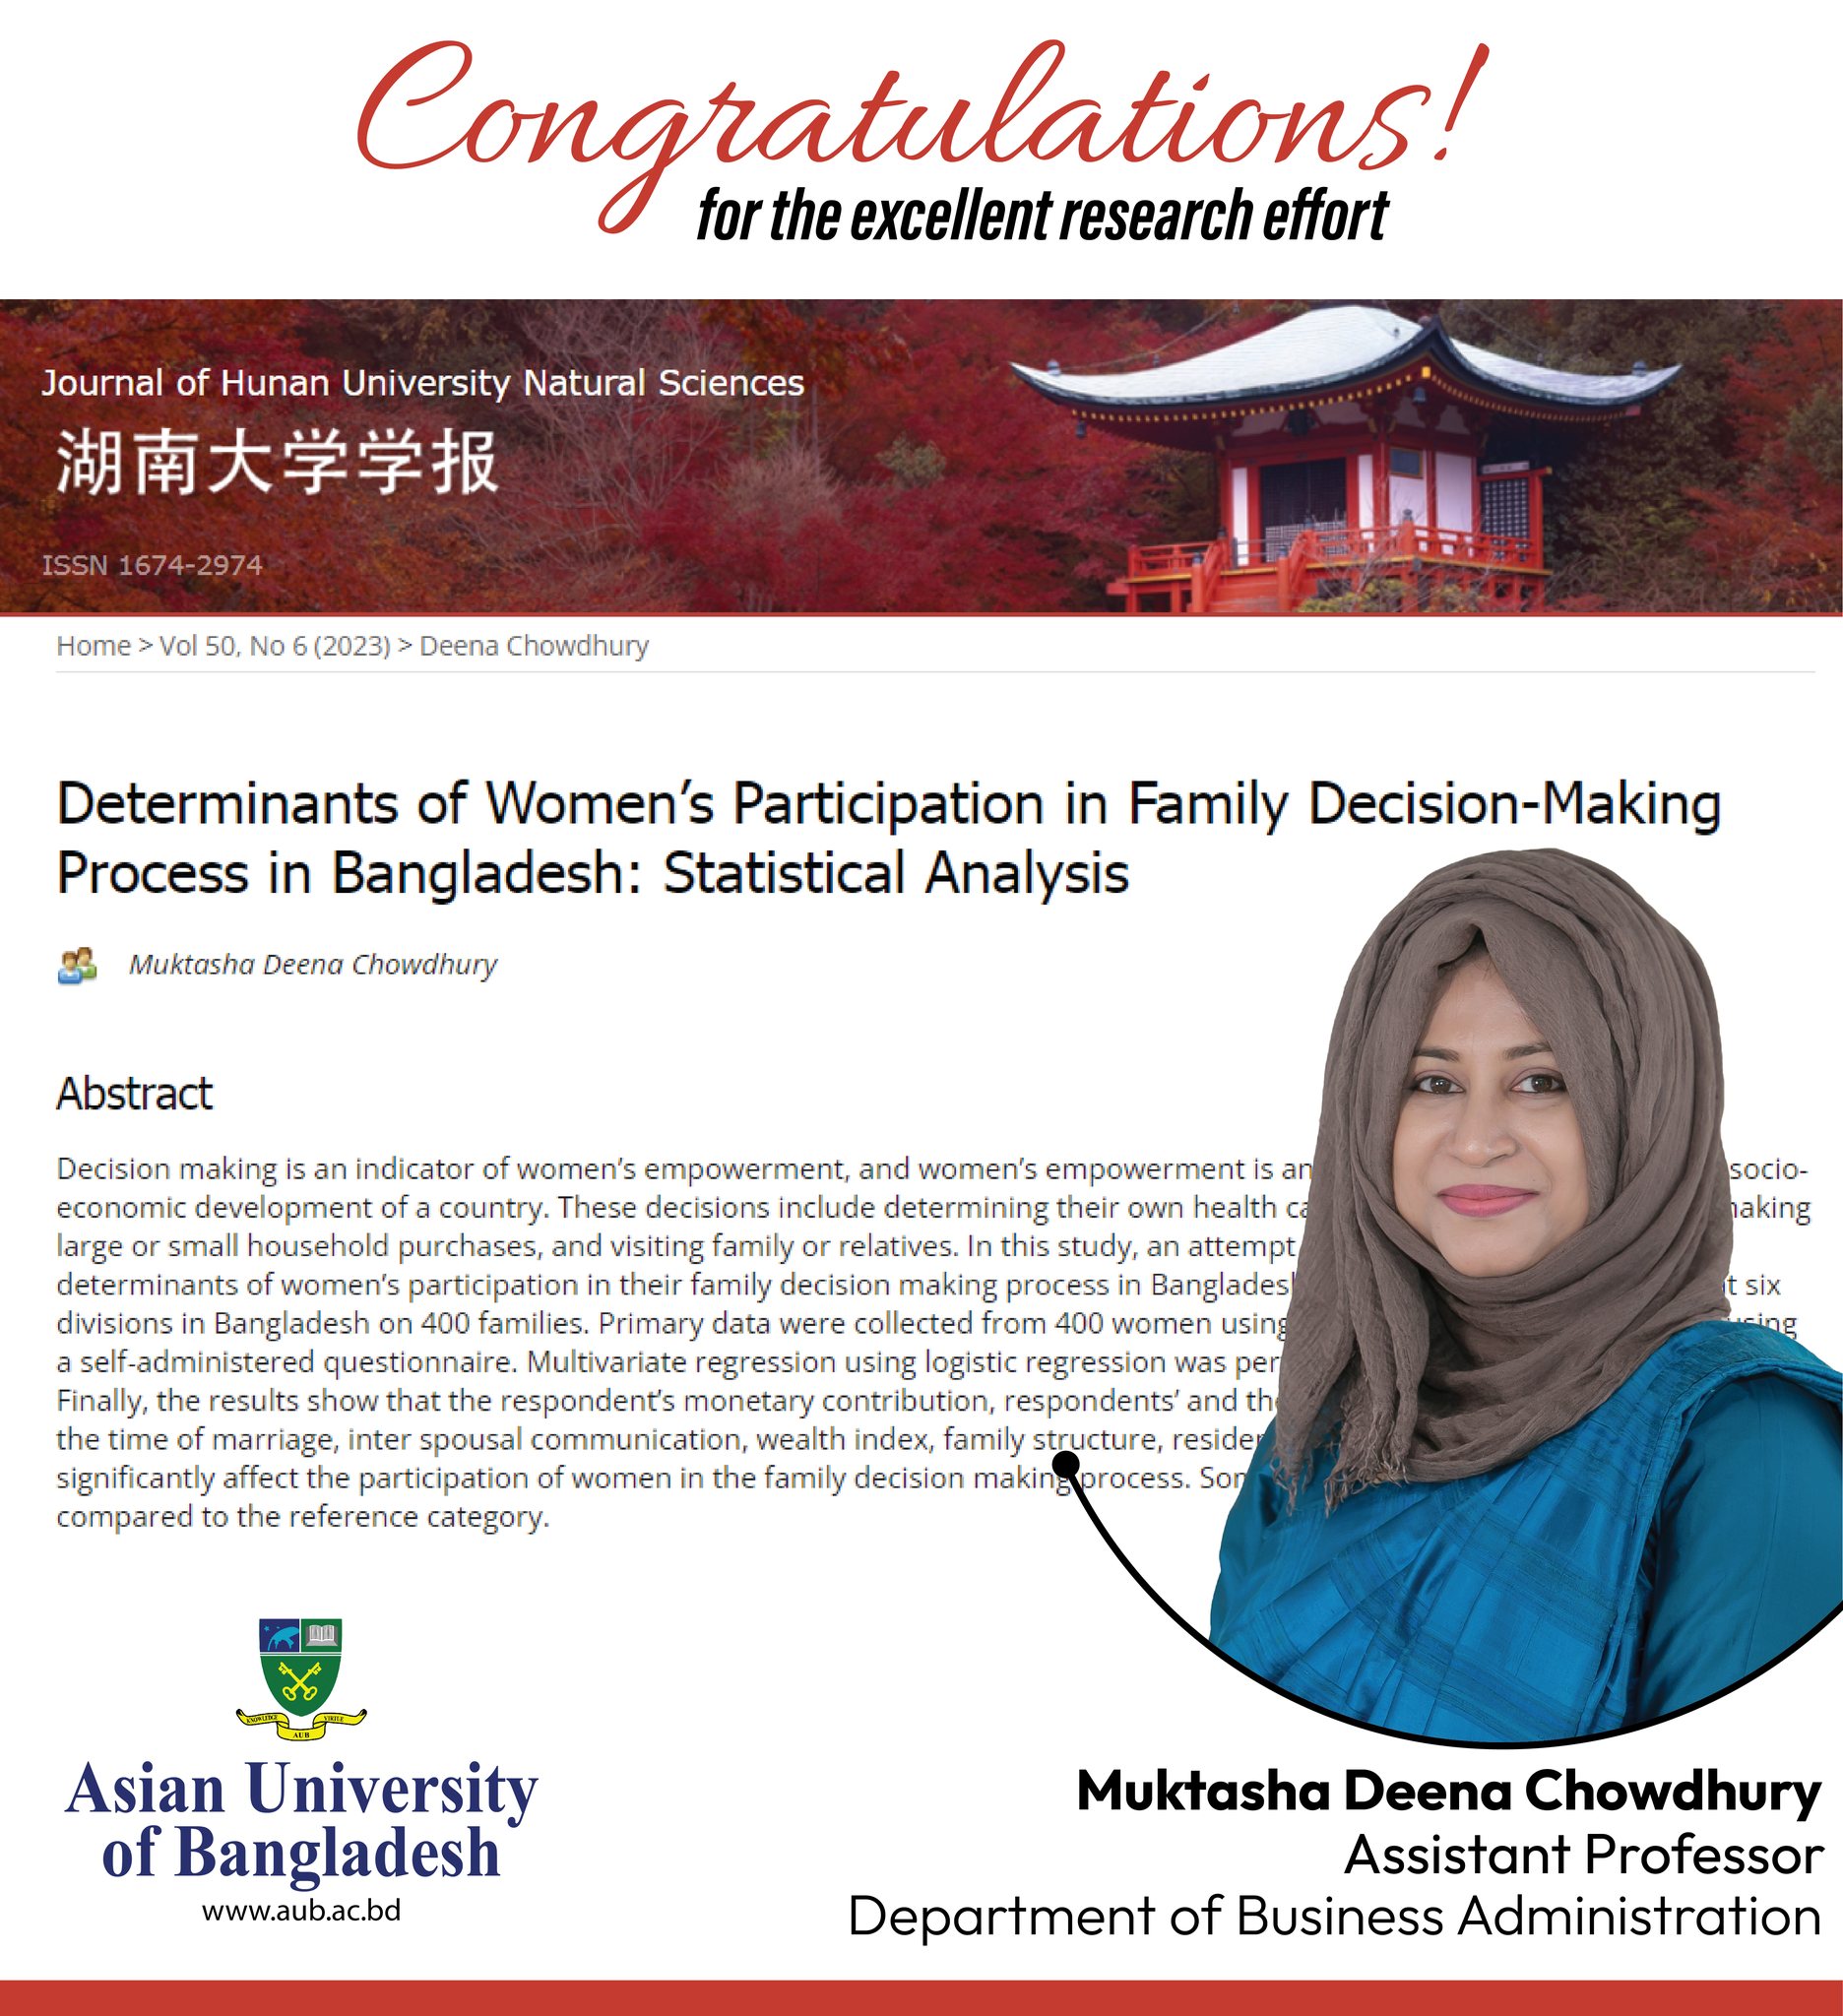 Congratulations for the excellent research effort Ms Muktasha Deena Chowdhury, Assistant Professor, Dept of Business Administration, AUB. One of her research papers has been published in Scopus-indexed Q2 ranking journal.